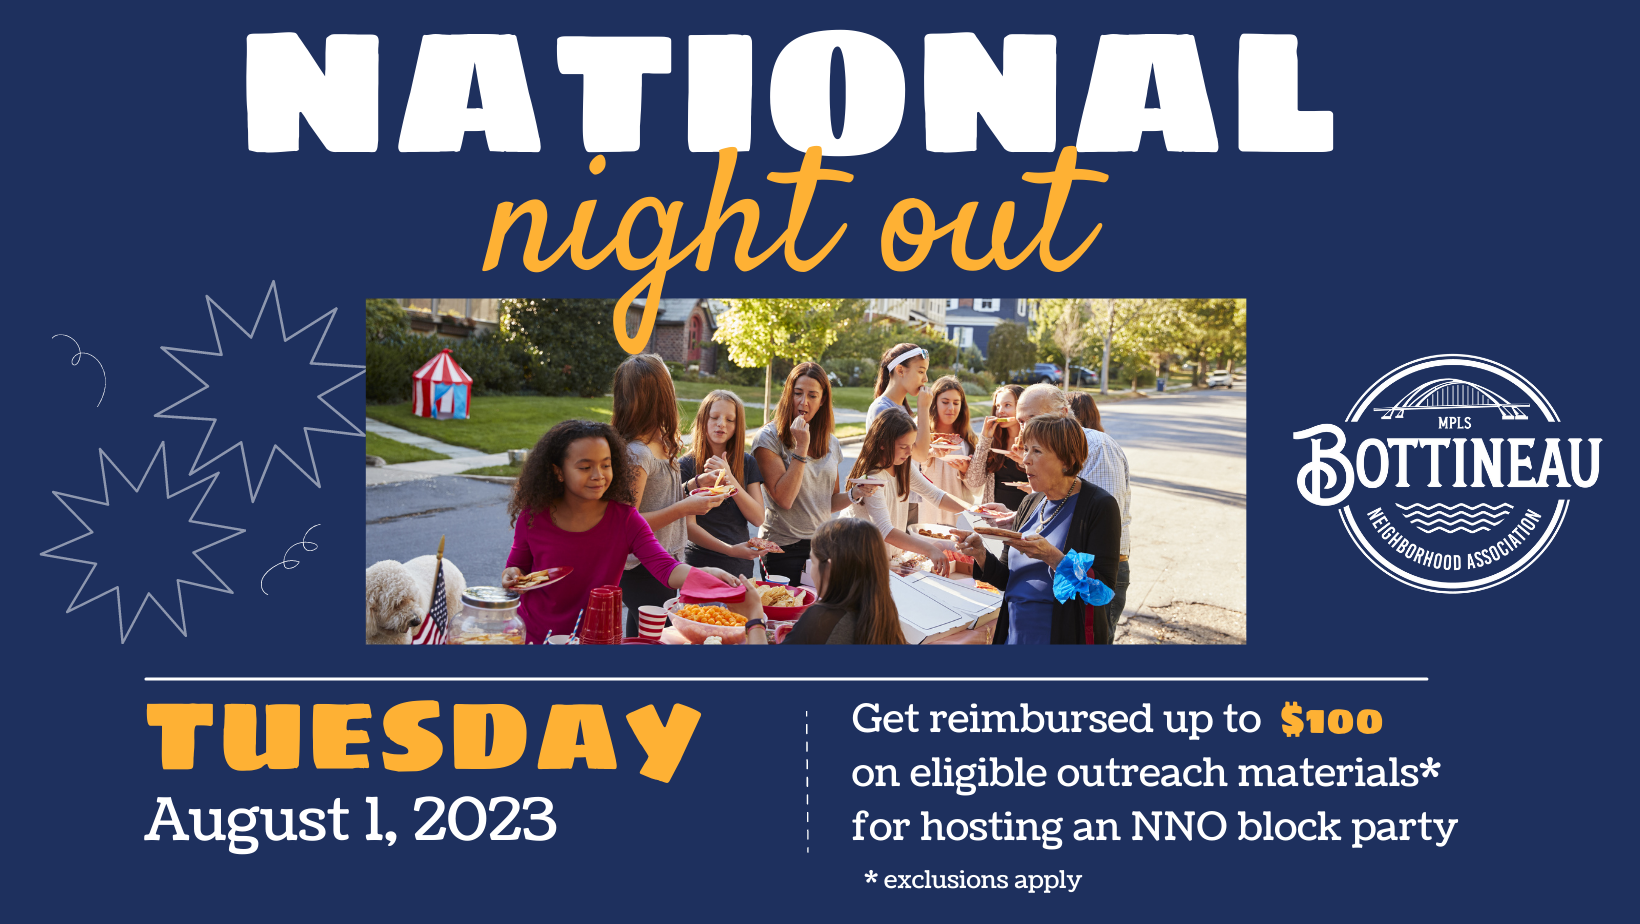 National Night Out, Tuesday August 1! 

If you're hosting a block party this year, contact us (the Bottineau Neighborhood Association), before and after your event to get reimbursed up to $100 for eligible outreach materials, excluding food and entertainment. Email bna@bottineauneighborhood.org for more info.